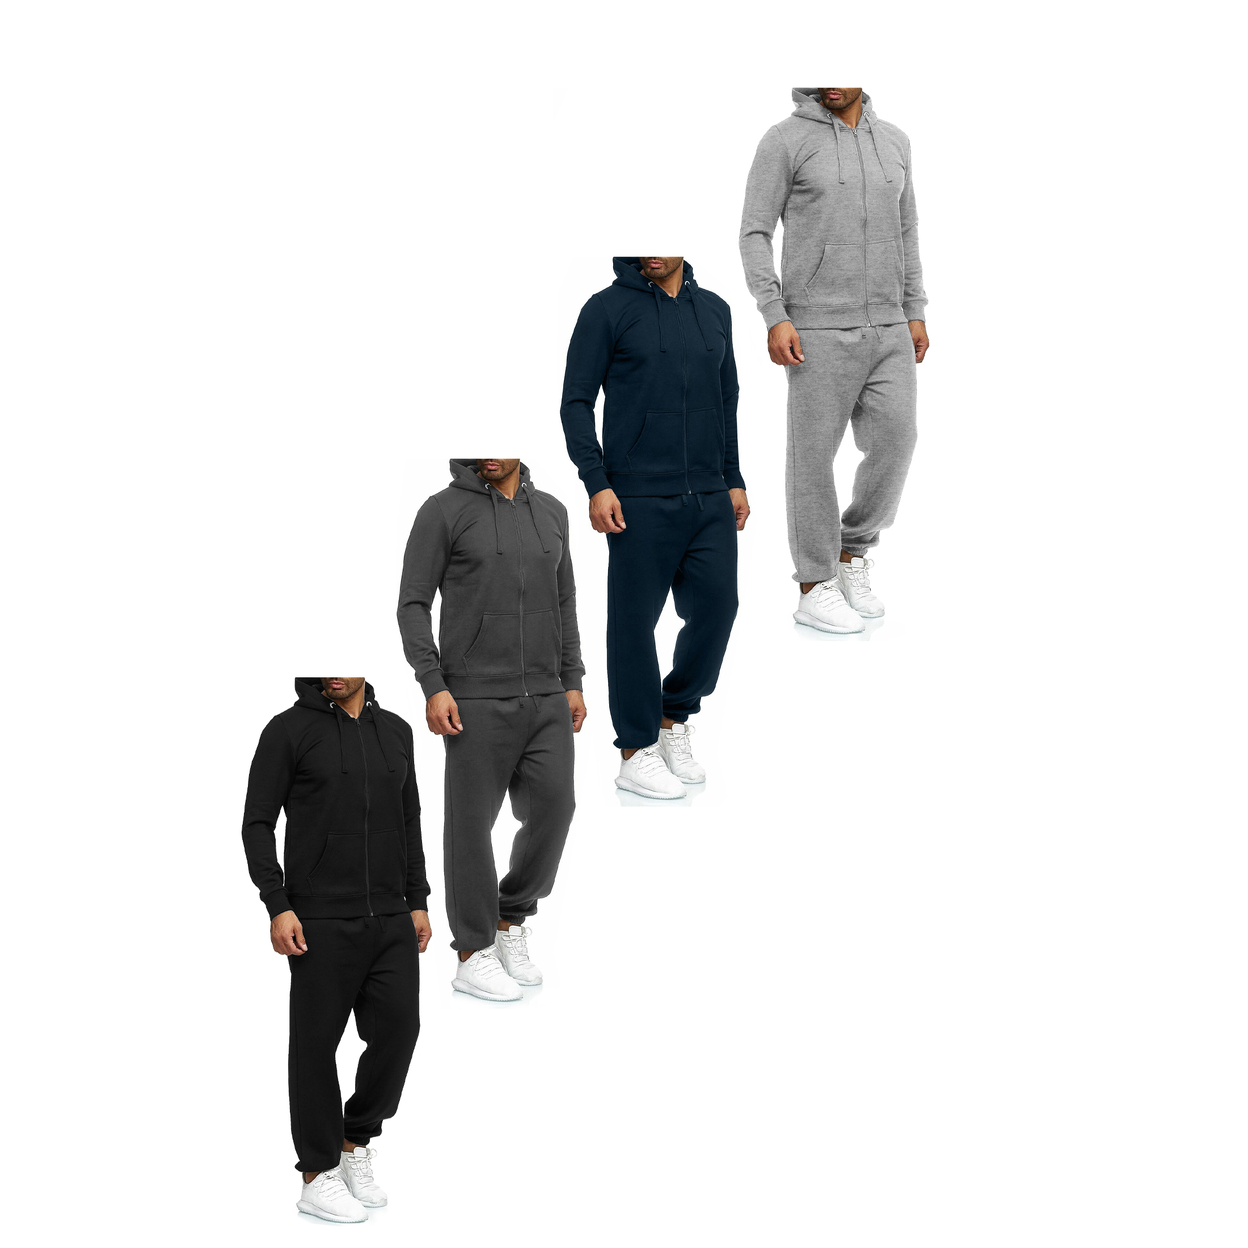 Multi-Pack: Men's Casual Big & Tall Athletic Active Winter Warm Fleece Lined Full Zip Tracksuit Jogger Set - Grey, 1-pack, Small